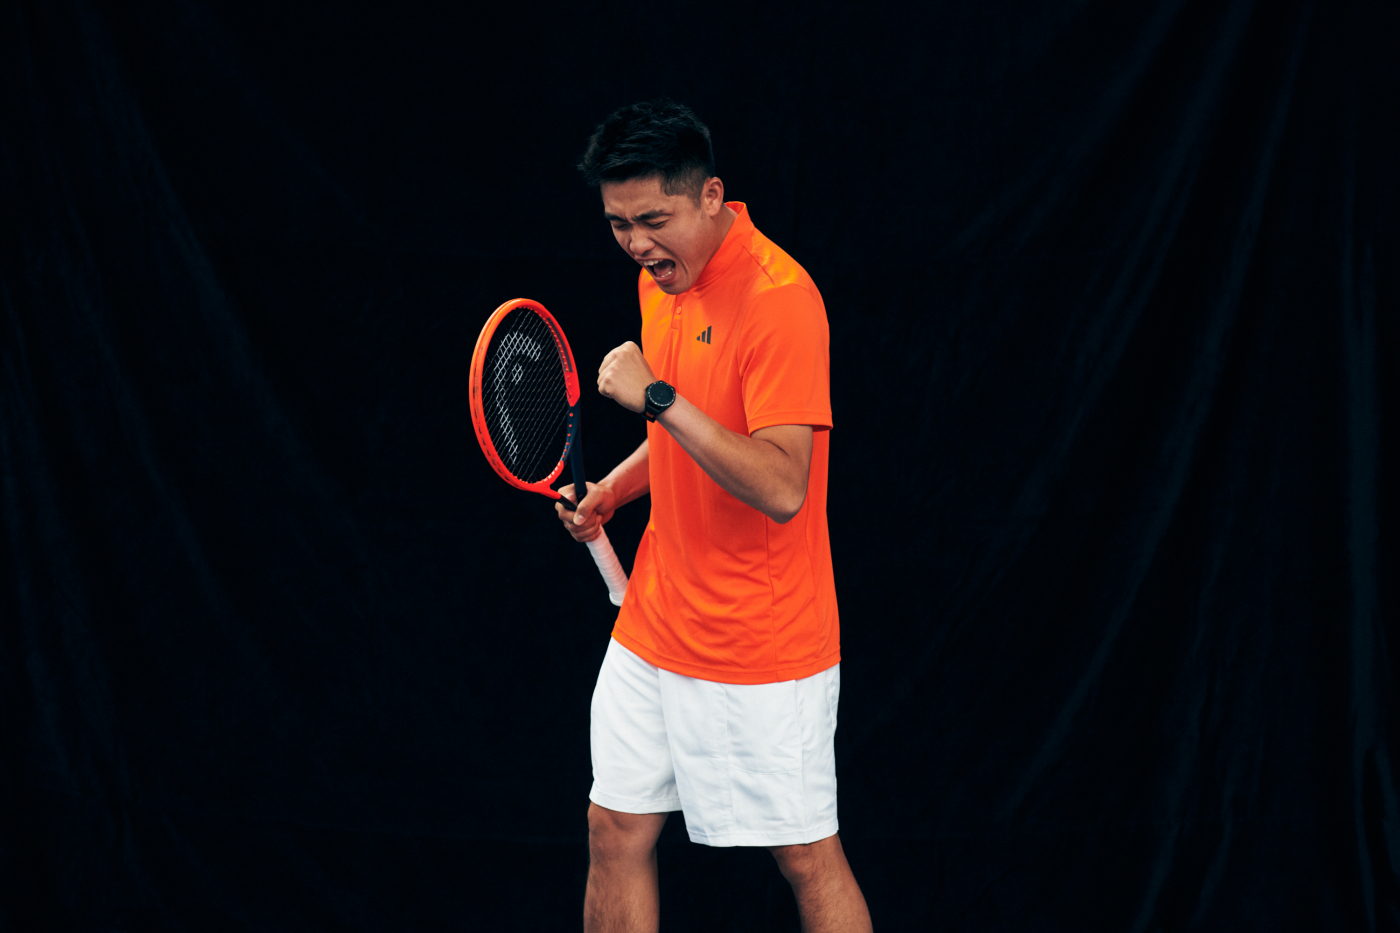 Tag Heuer campaign shot with tennis player Wu Yibing by London based photographer Dominic Marley